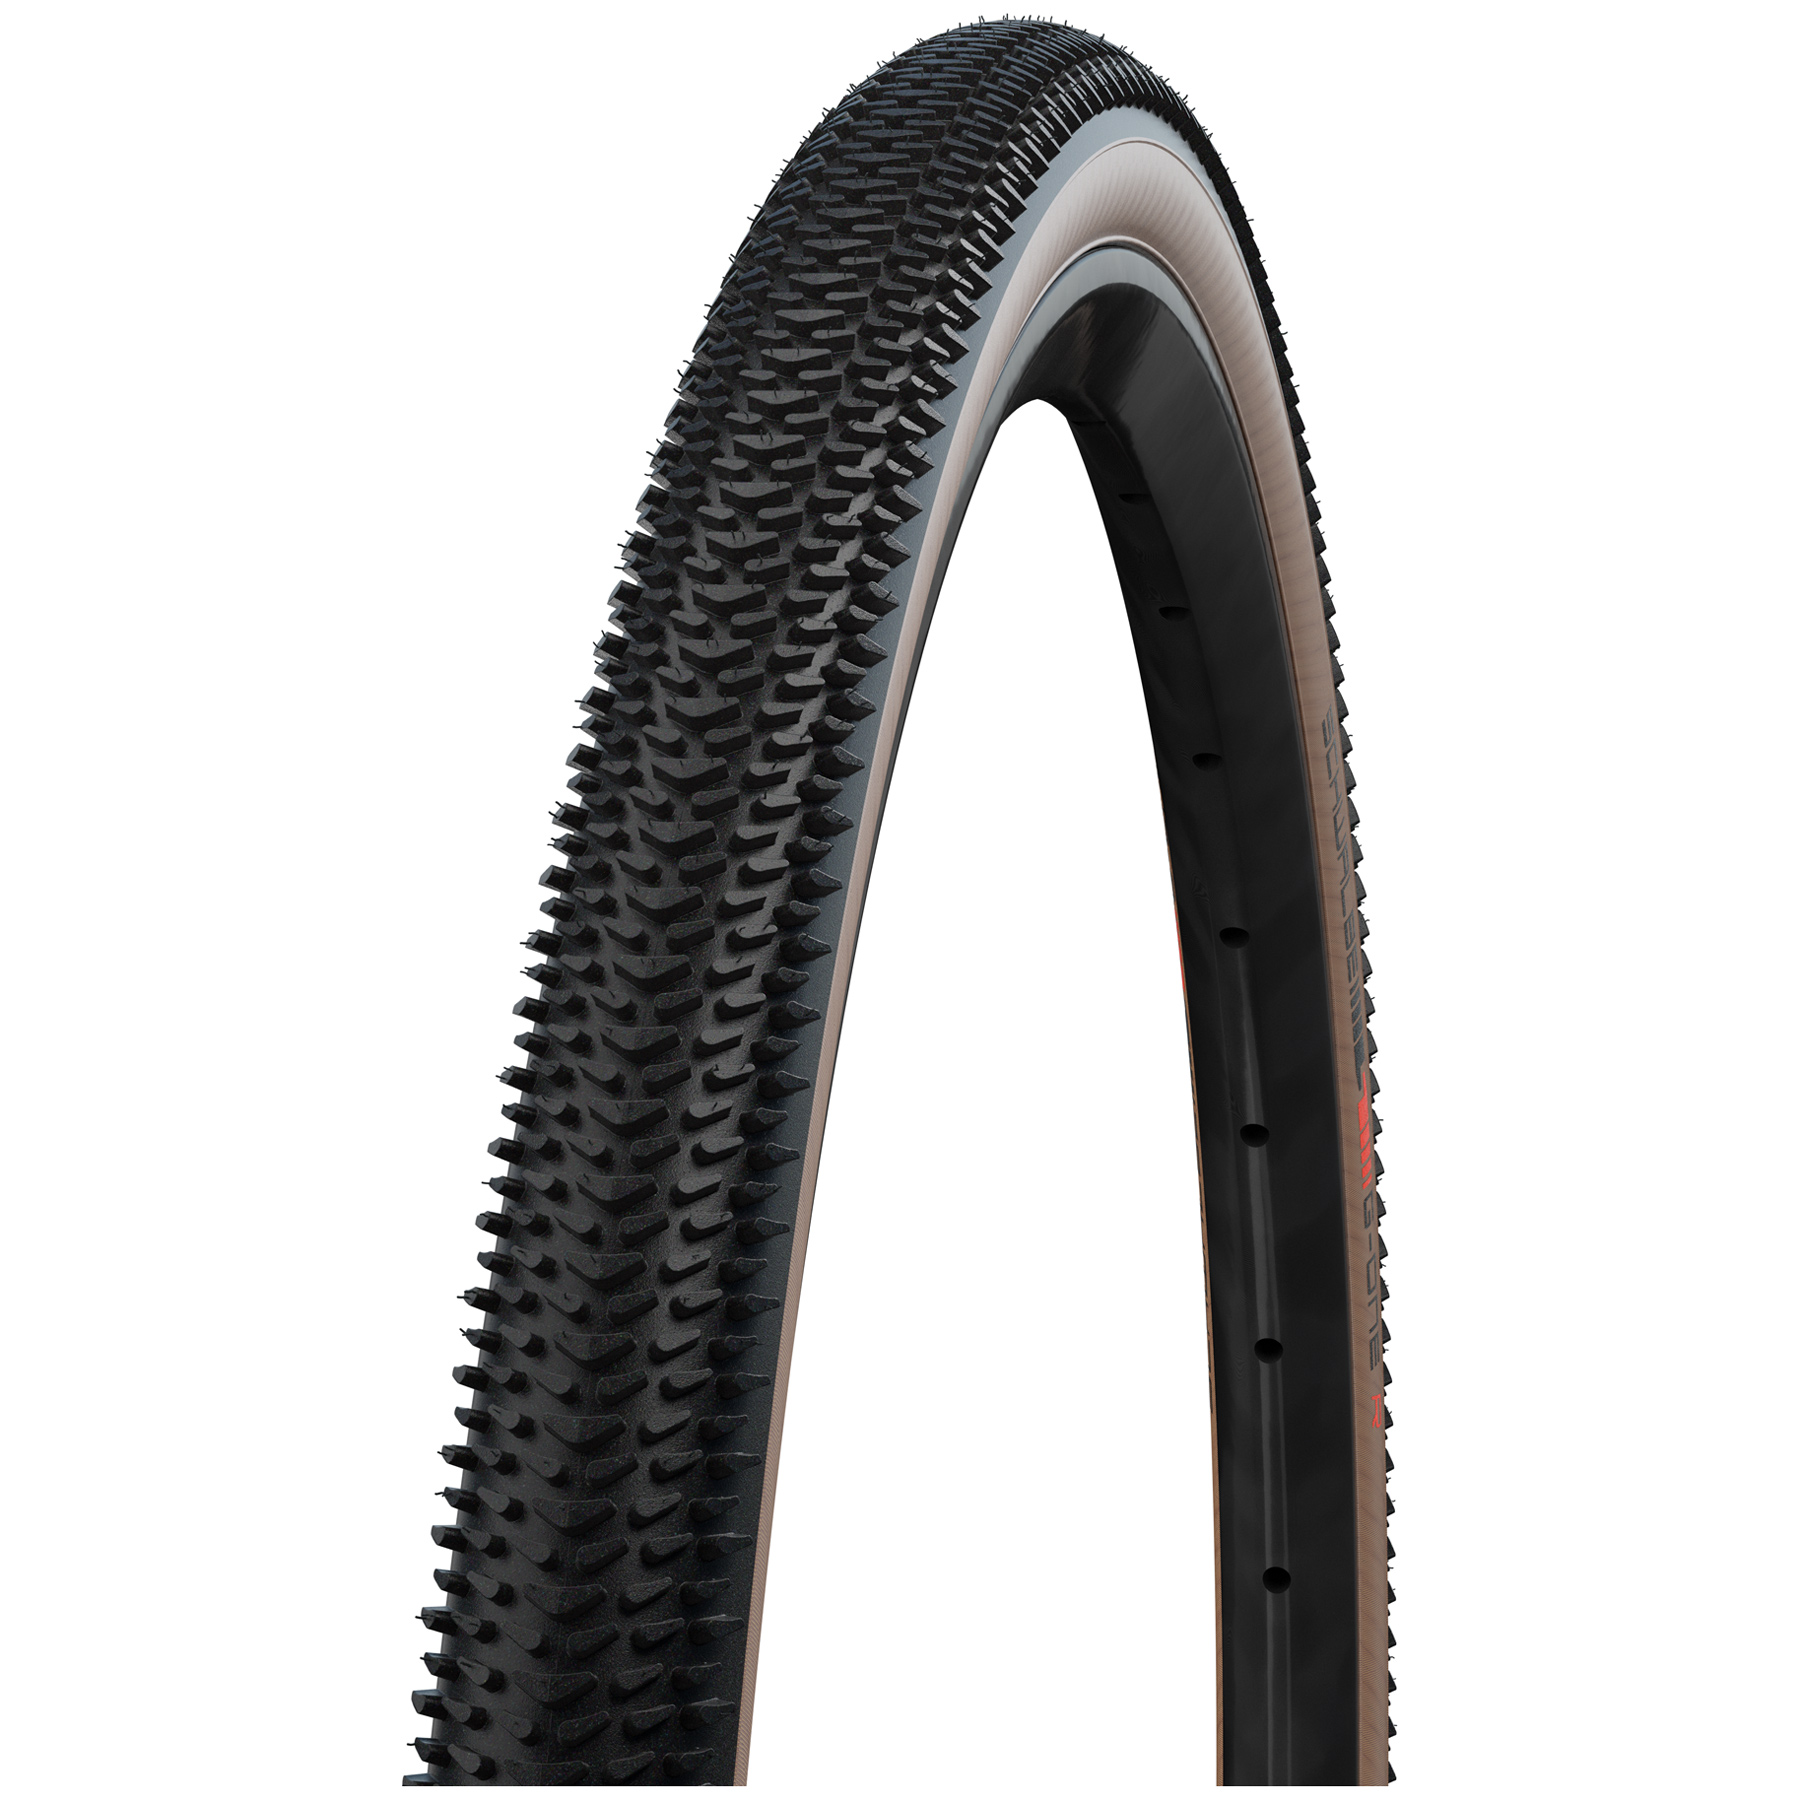 Picture of Schwalbe G-One R Folding Tire - Gravel | Evolution | Addix Race | Super Race | TLEasy - E25 - 40-622 | Transparent Sidewall